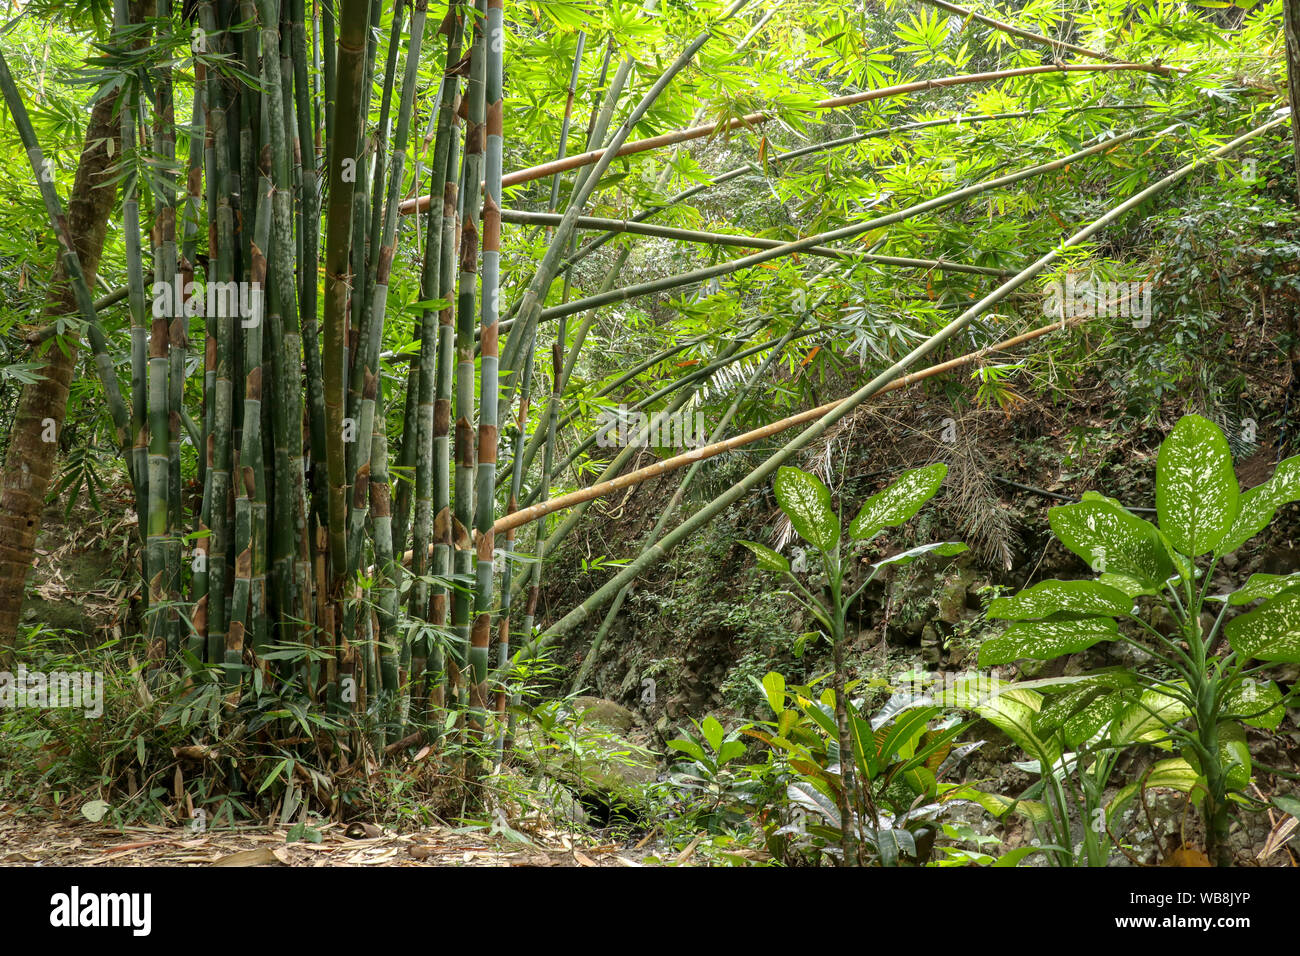 Dense clump of tall bamboo trees near mountain river in rainforest. Bamboo trunks are leaning over the river bed. Dieffenbachia tropical plants Stock Photo